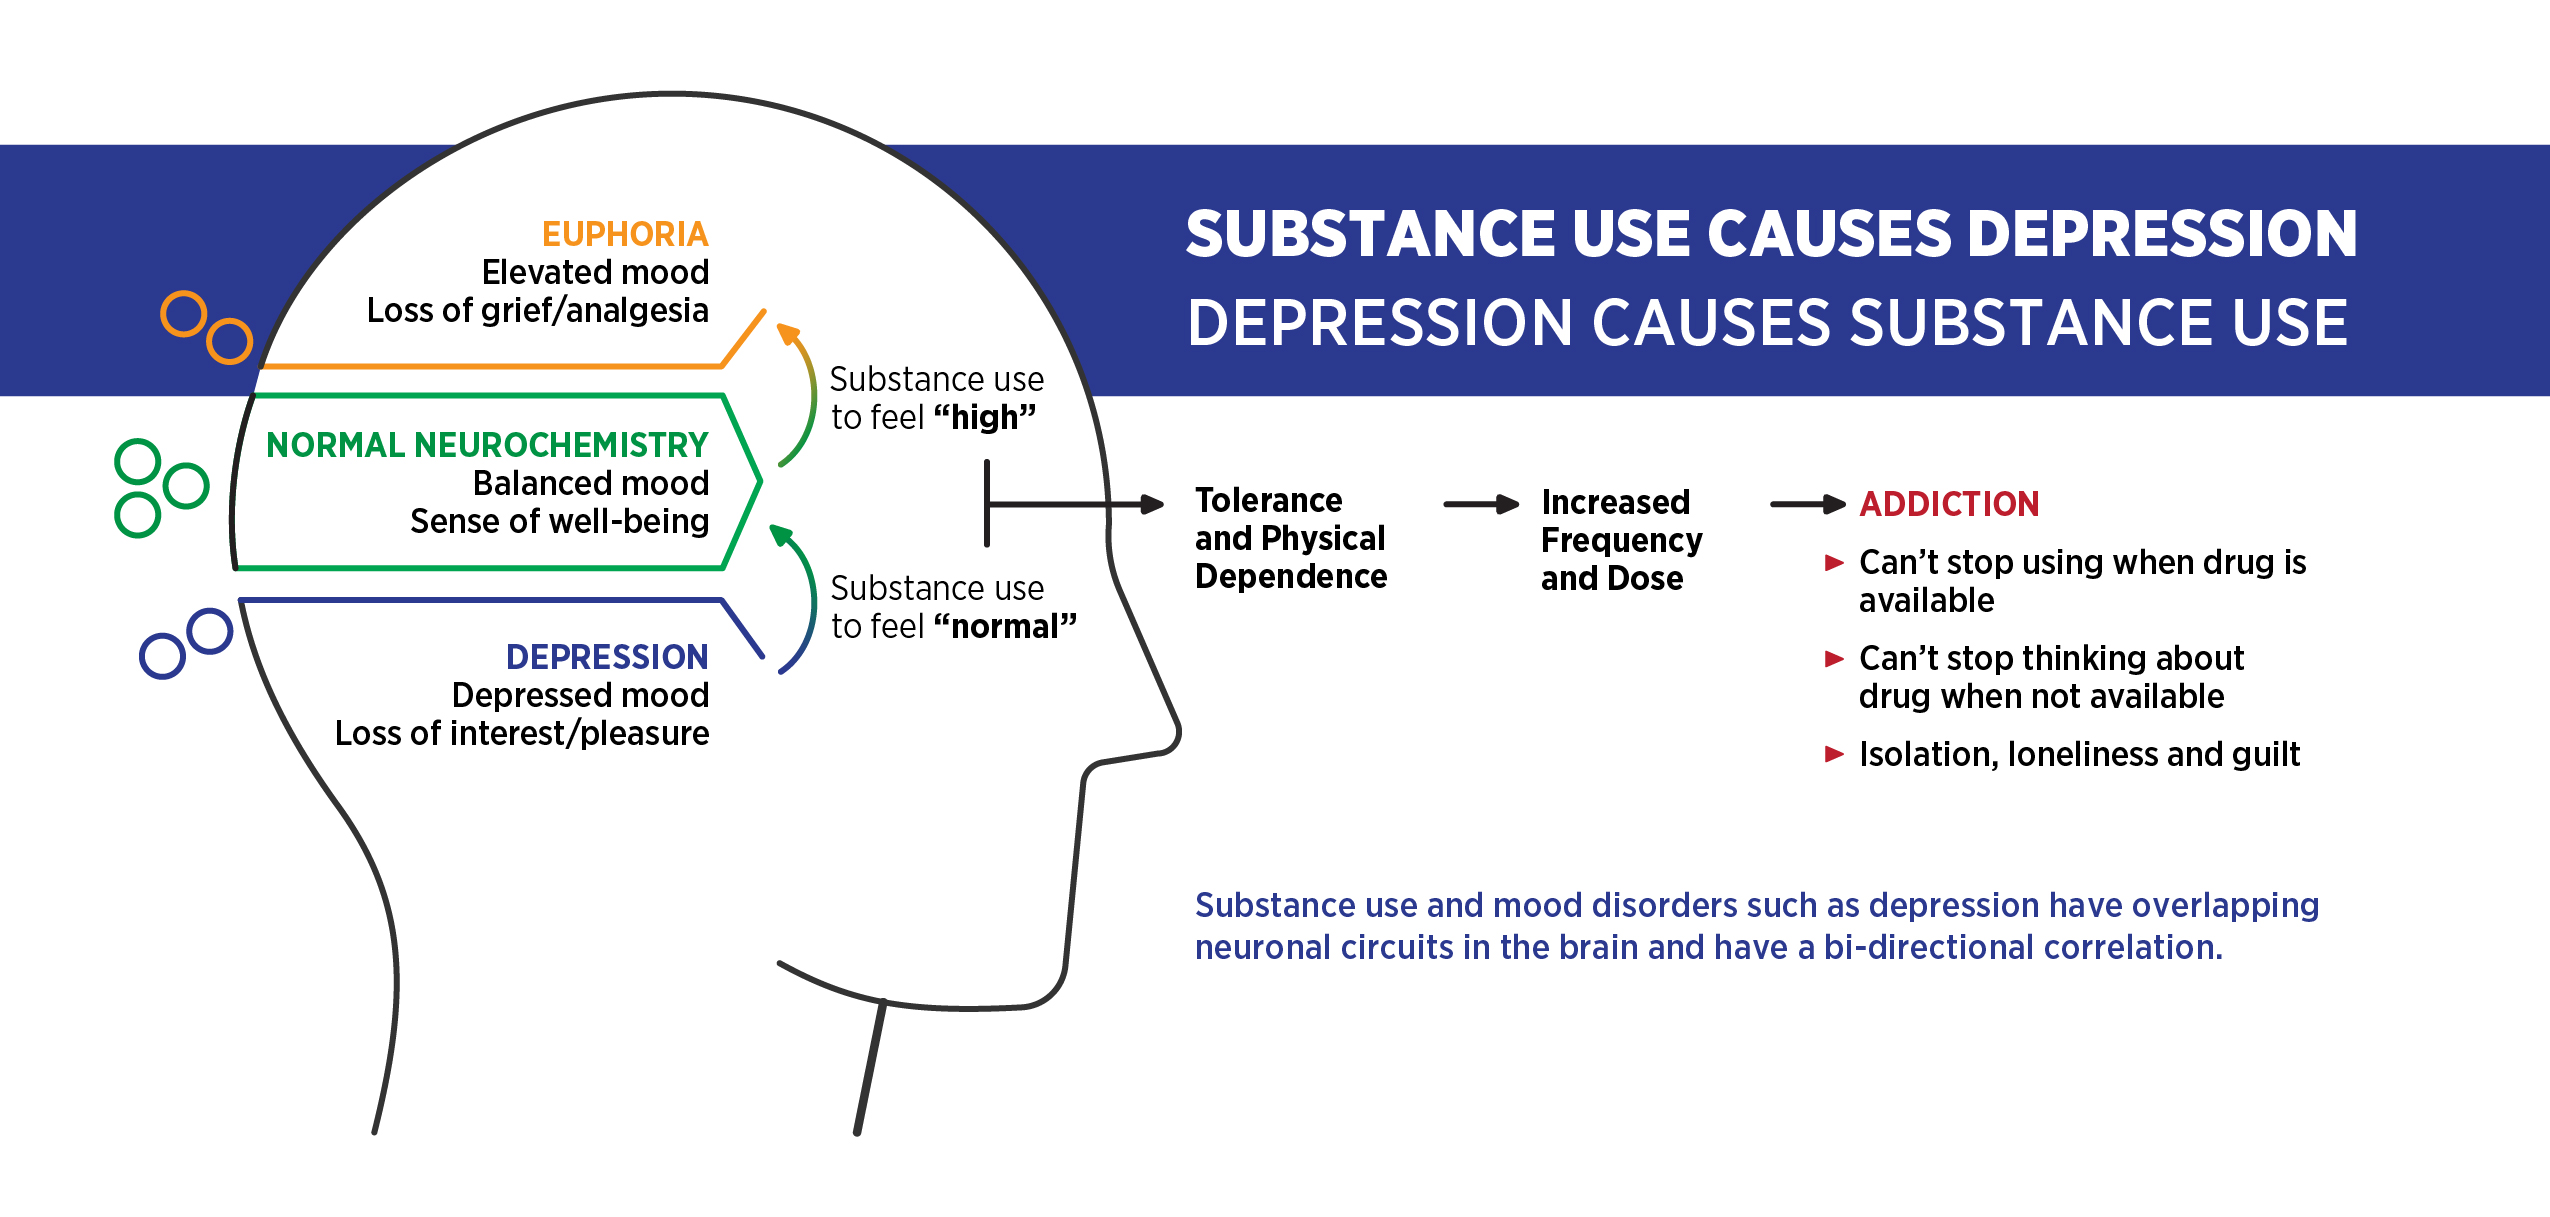 Flow chart diagram of interdependent relationship between depression and substance use, showing effects on mental and physical symptoms and behaviors related to addiction.